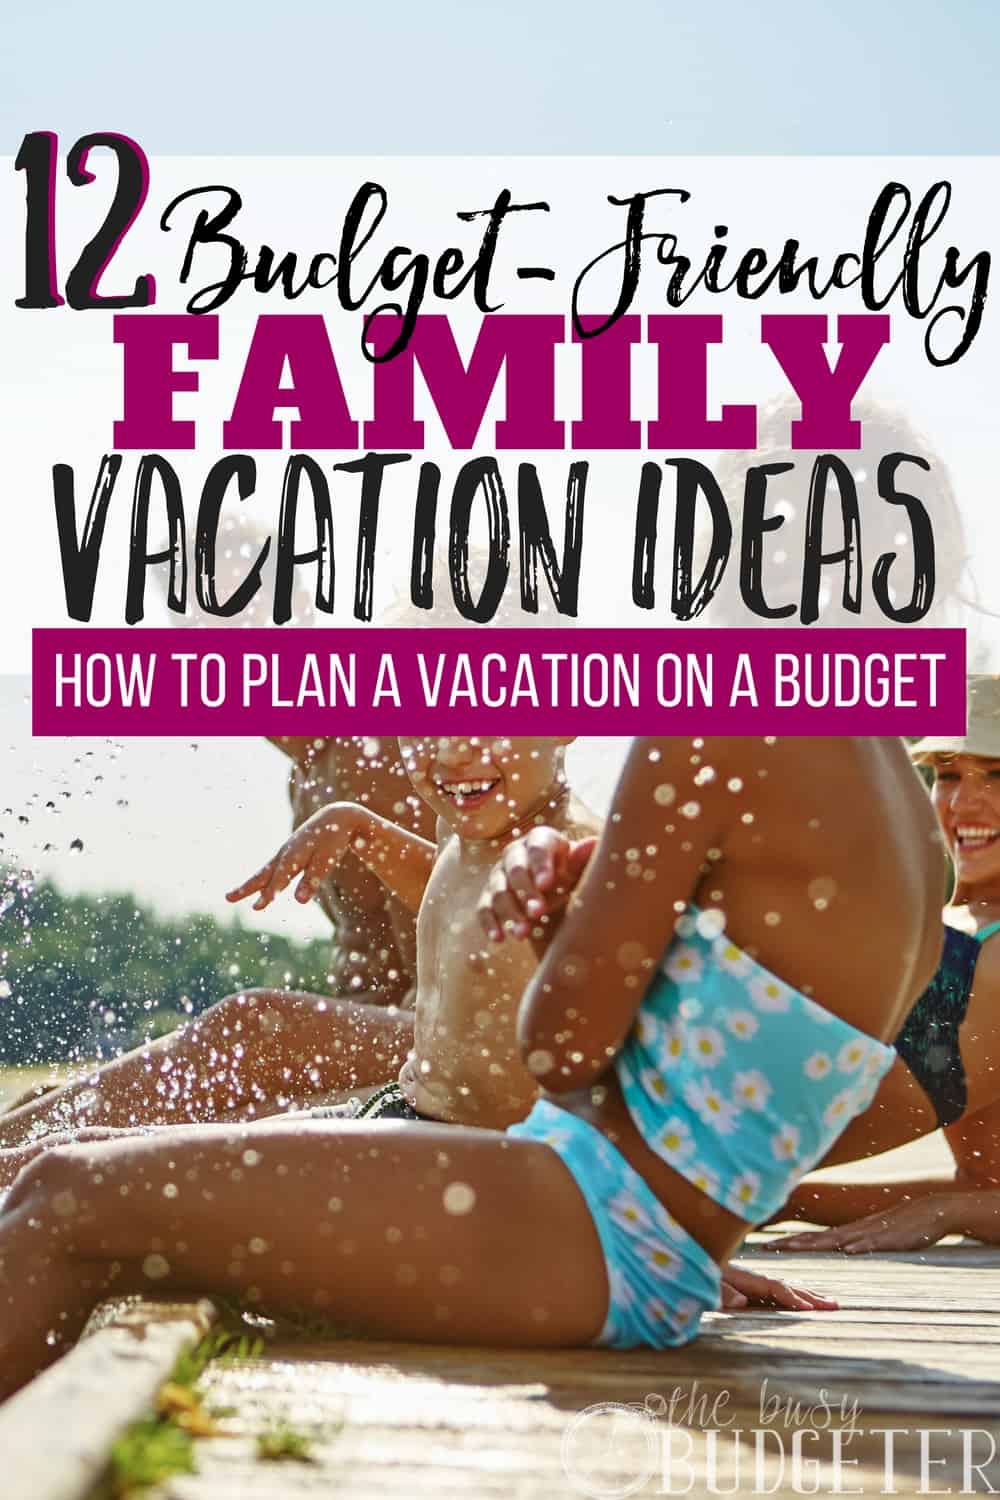 Holidays Have You On A Tight Budget?